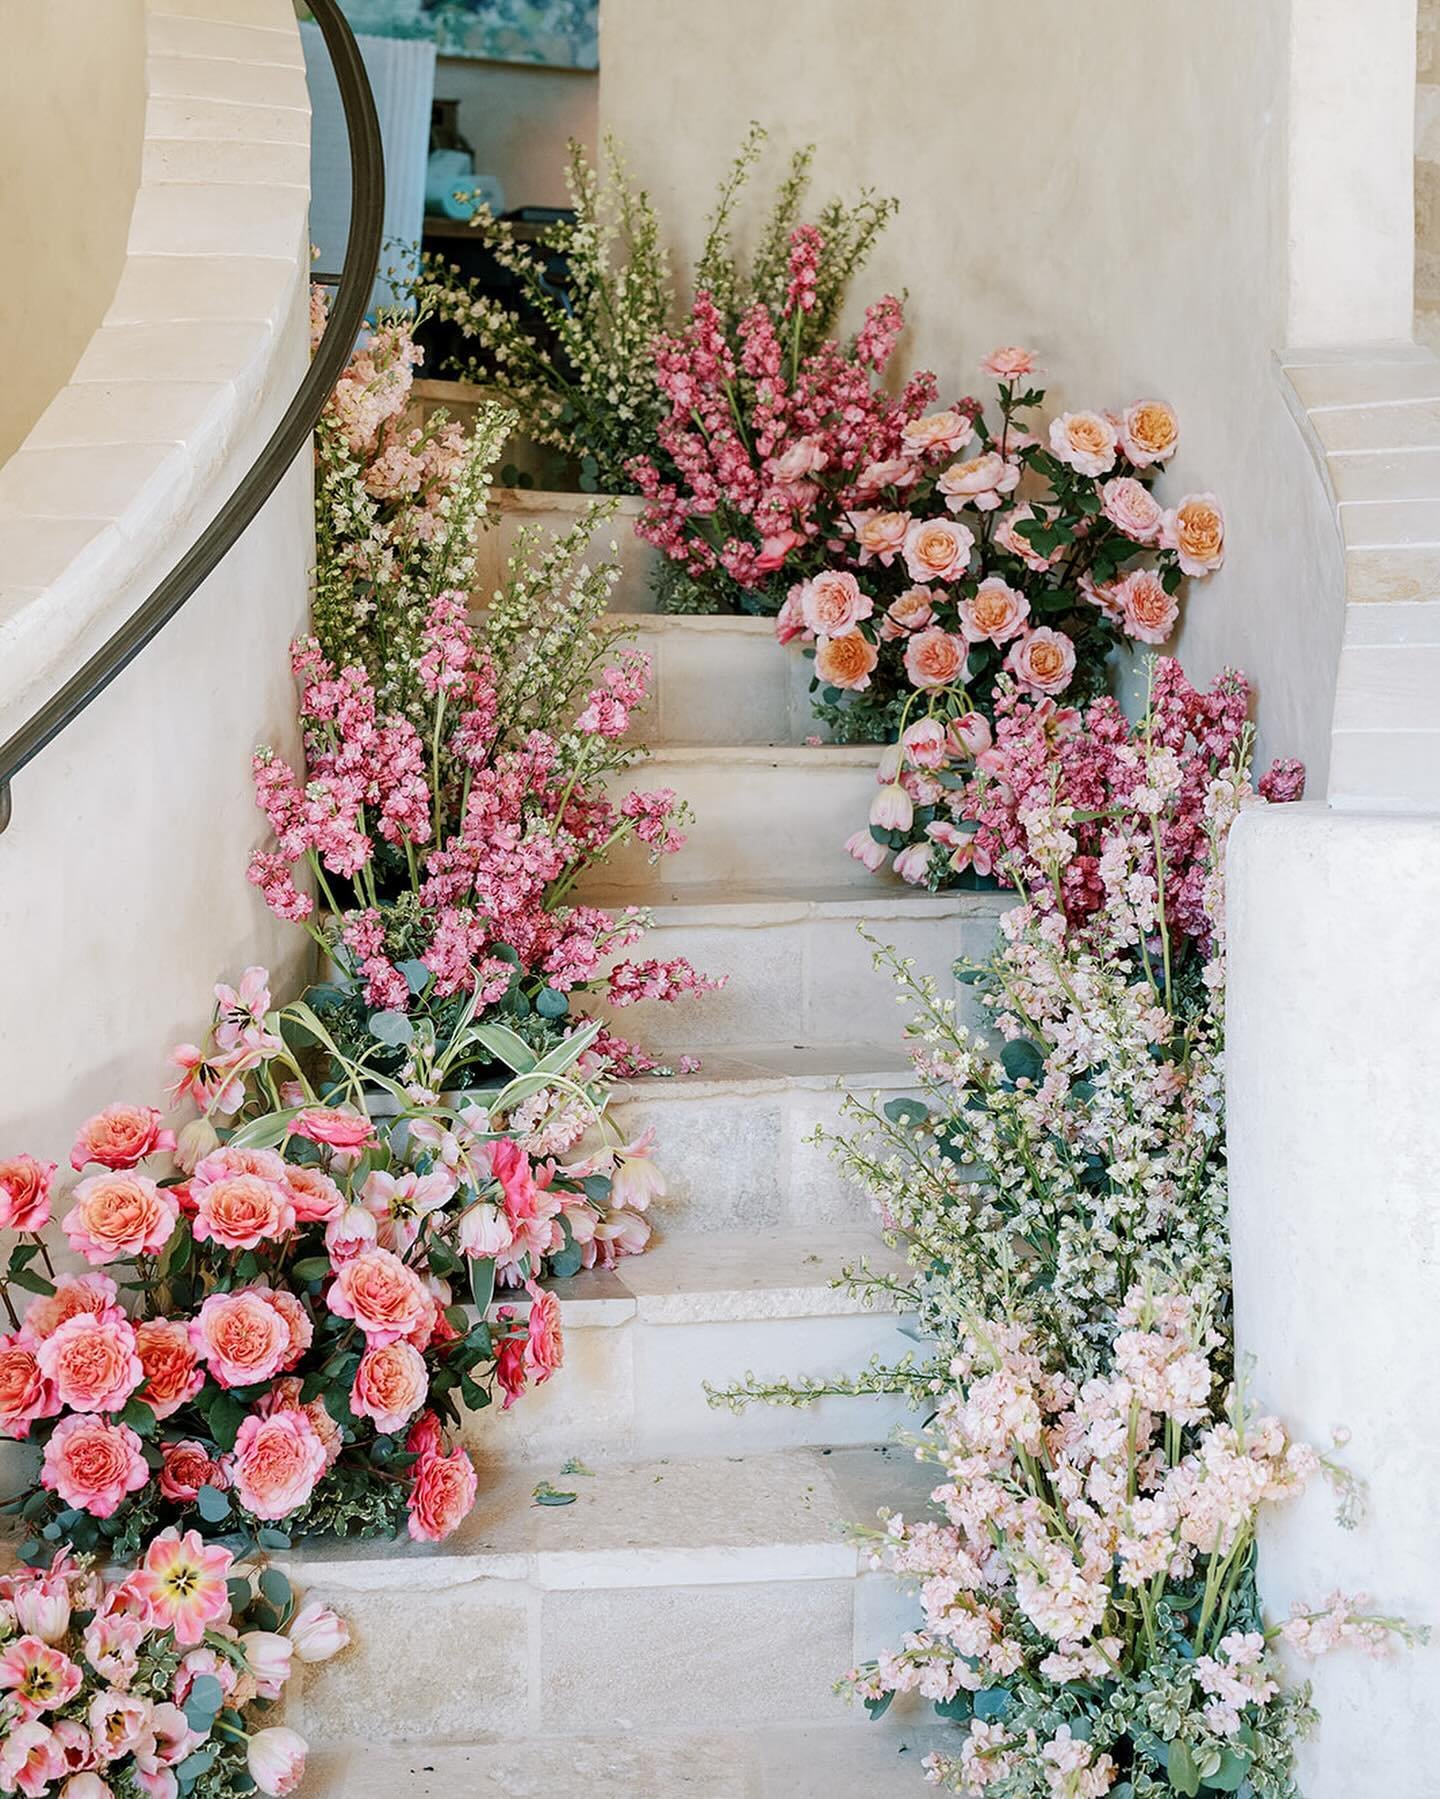 A grand floral staircase entrance ✨

Host: @styledshootsacrossamerica 
Planning: @heatherbengeofficial 
Assistant Planners: @alexiawoolumssaa @amodernfete @lacedwithgraceinfo @akbrides
Venue: @sunstonewinery @sunstonevilla 
Hair &amp; Makeup: @sunkis